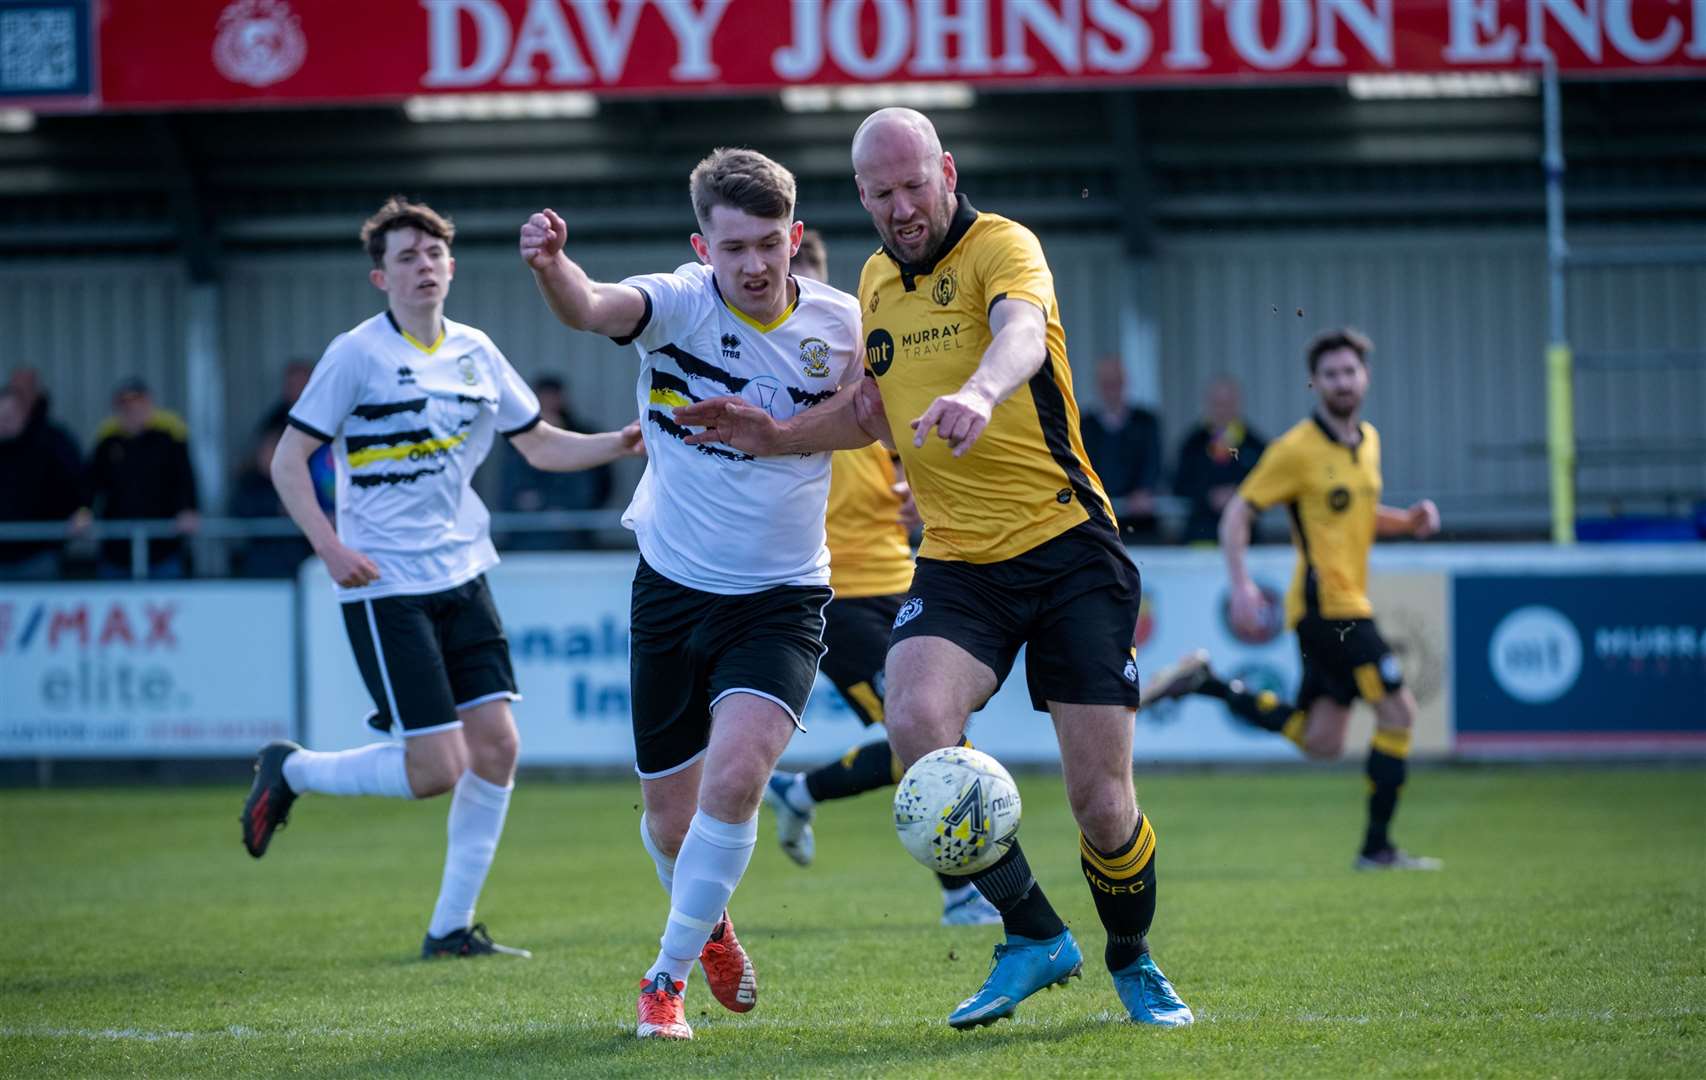 Ross Tokely (right) pictured in action for Nairn County. Picture: Callum Mackay.